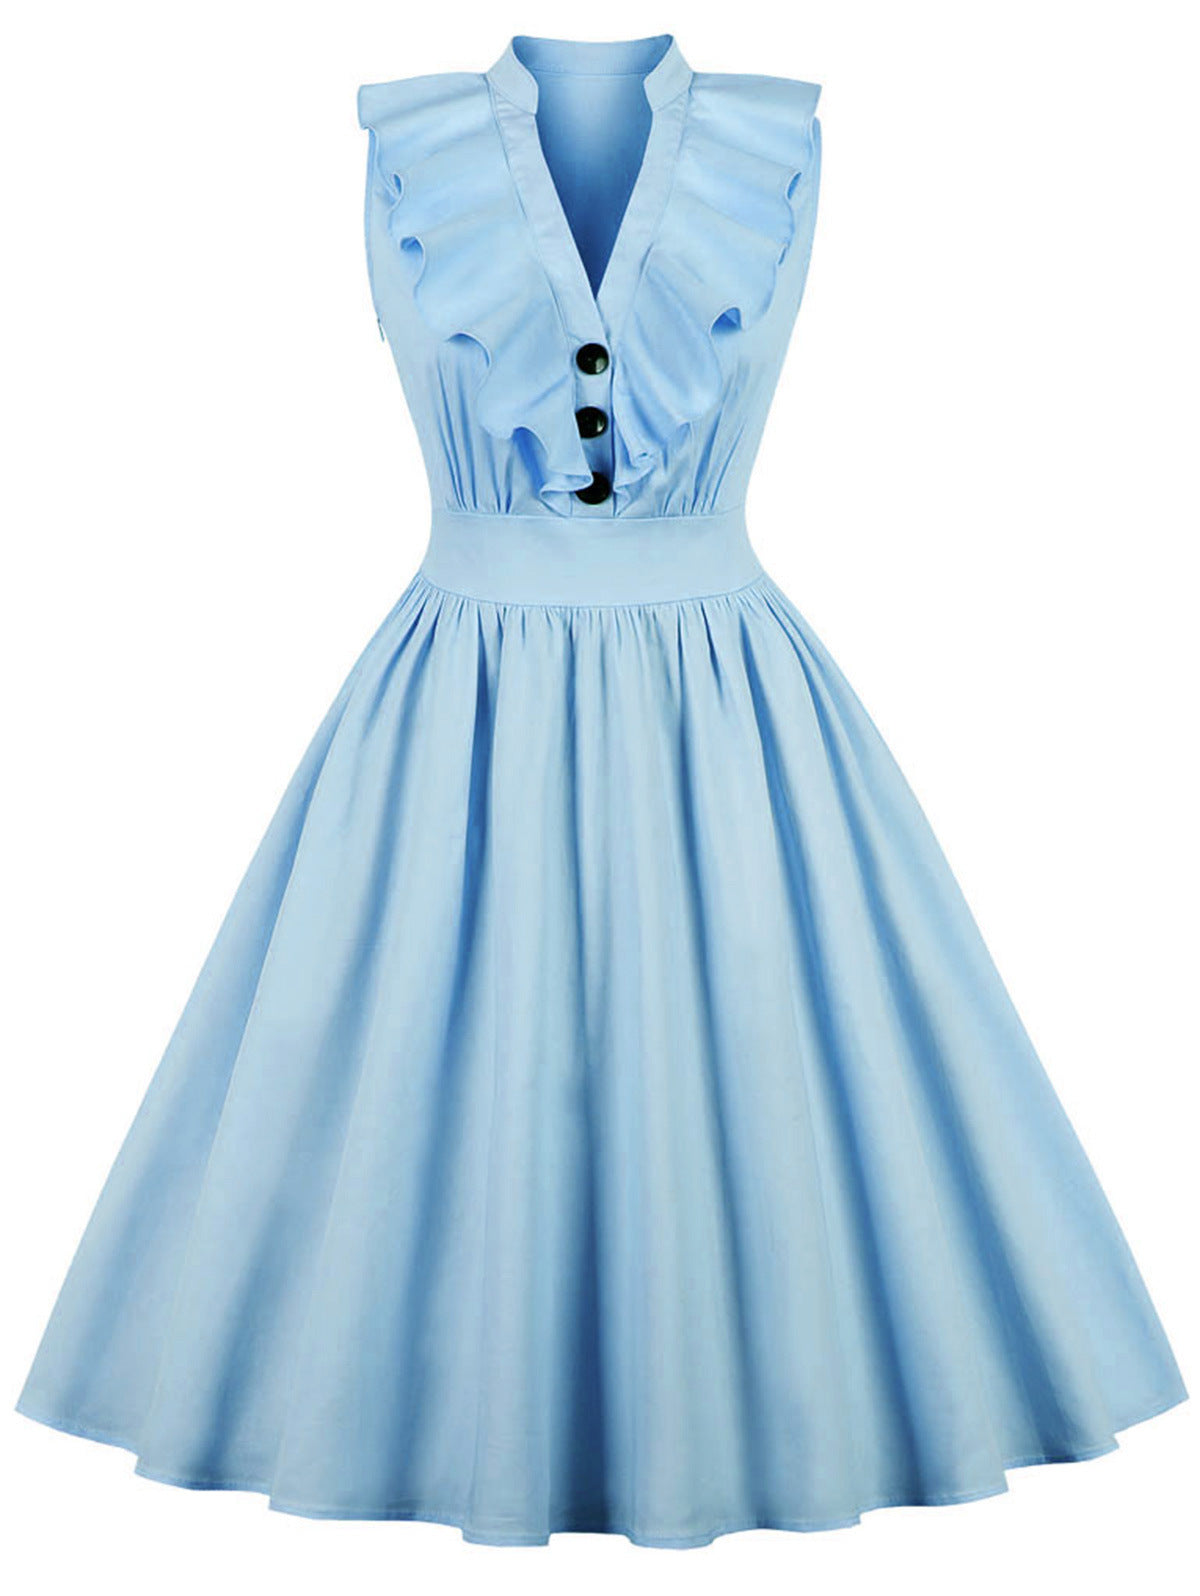 V Neck Ruffle Front Solid Colored Retro Swing Dress